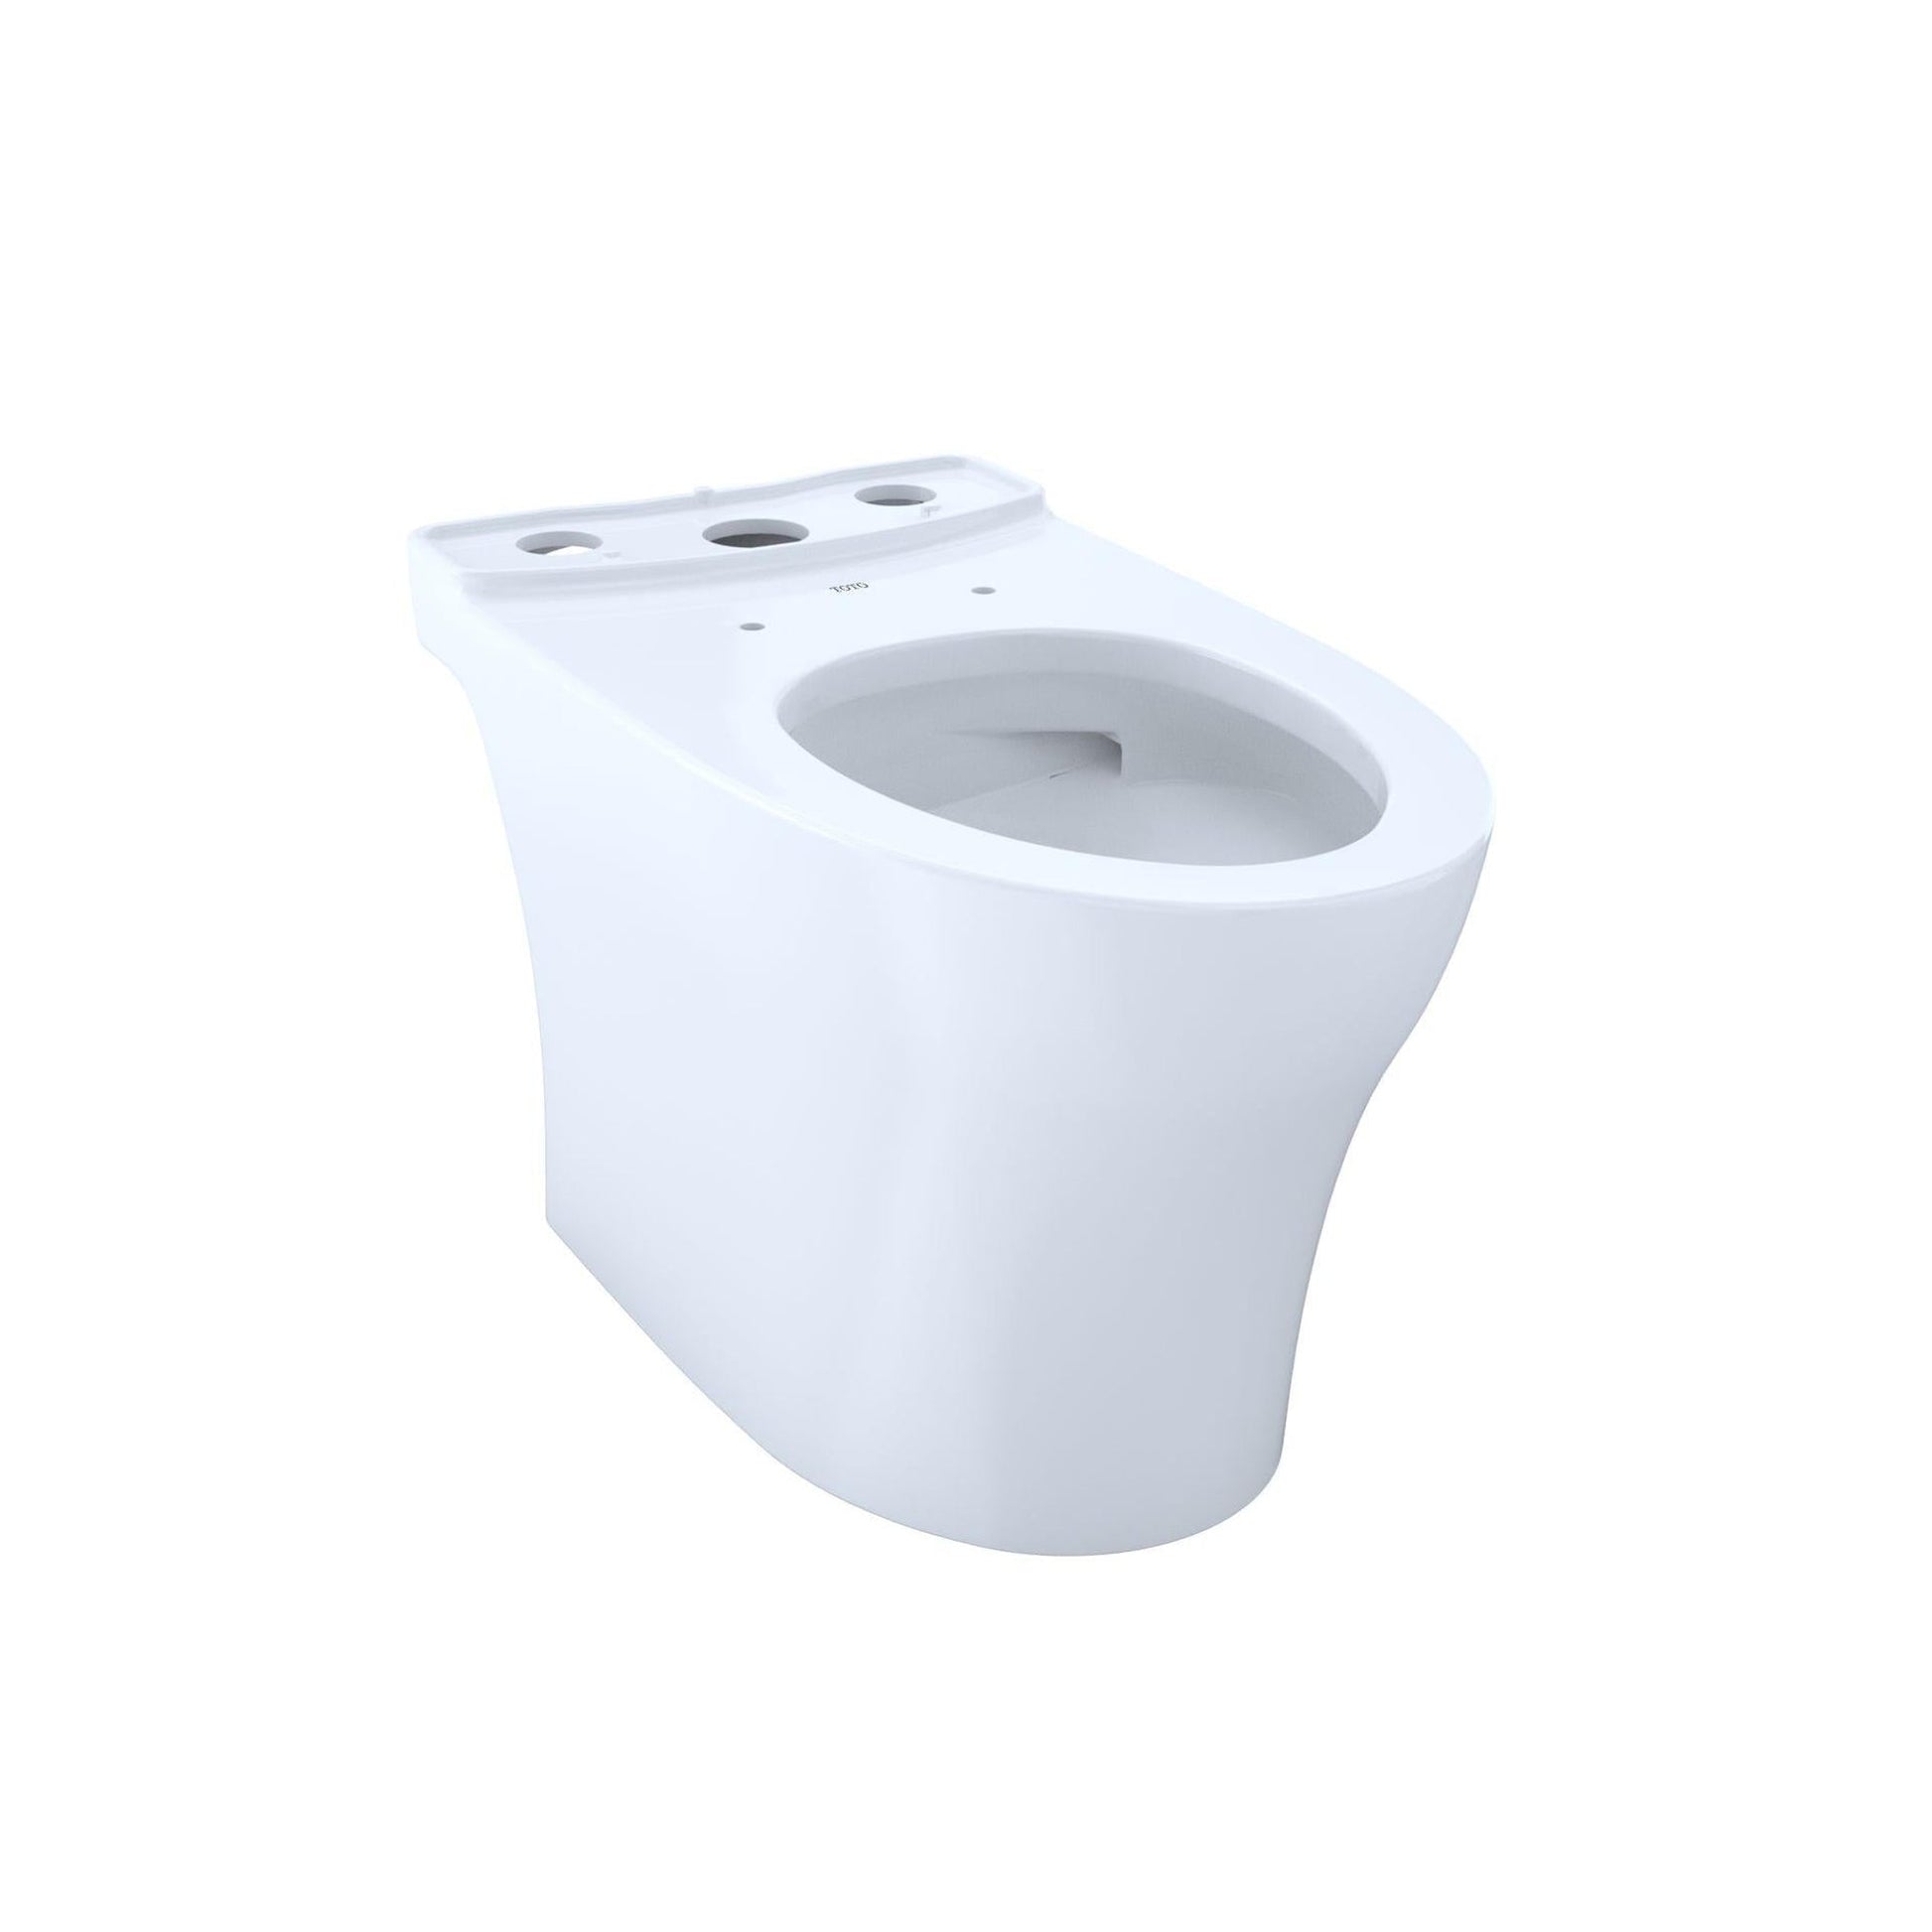 TOTO Aquia IV Cotton White 1.0 GPF & 0.8 GPF Dual-Flush Two-Piece Elongated Toilet With WASHLET+ Connection - Slim Seat Included